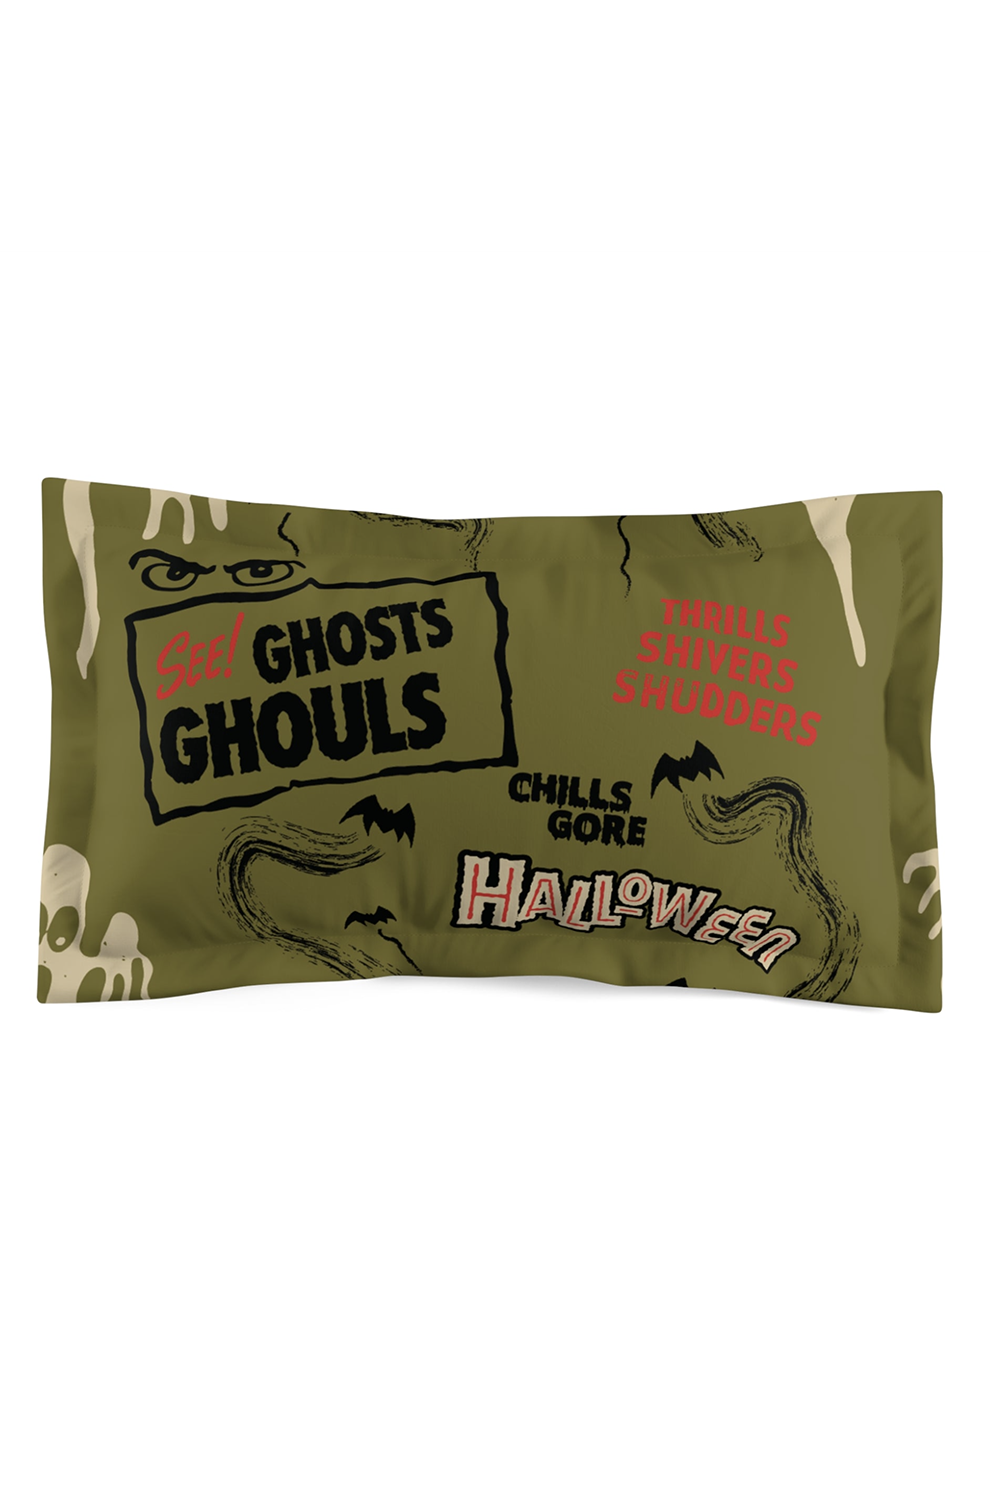 Ghosts & Ghouls Left Microfiber Pillow Sham